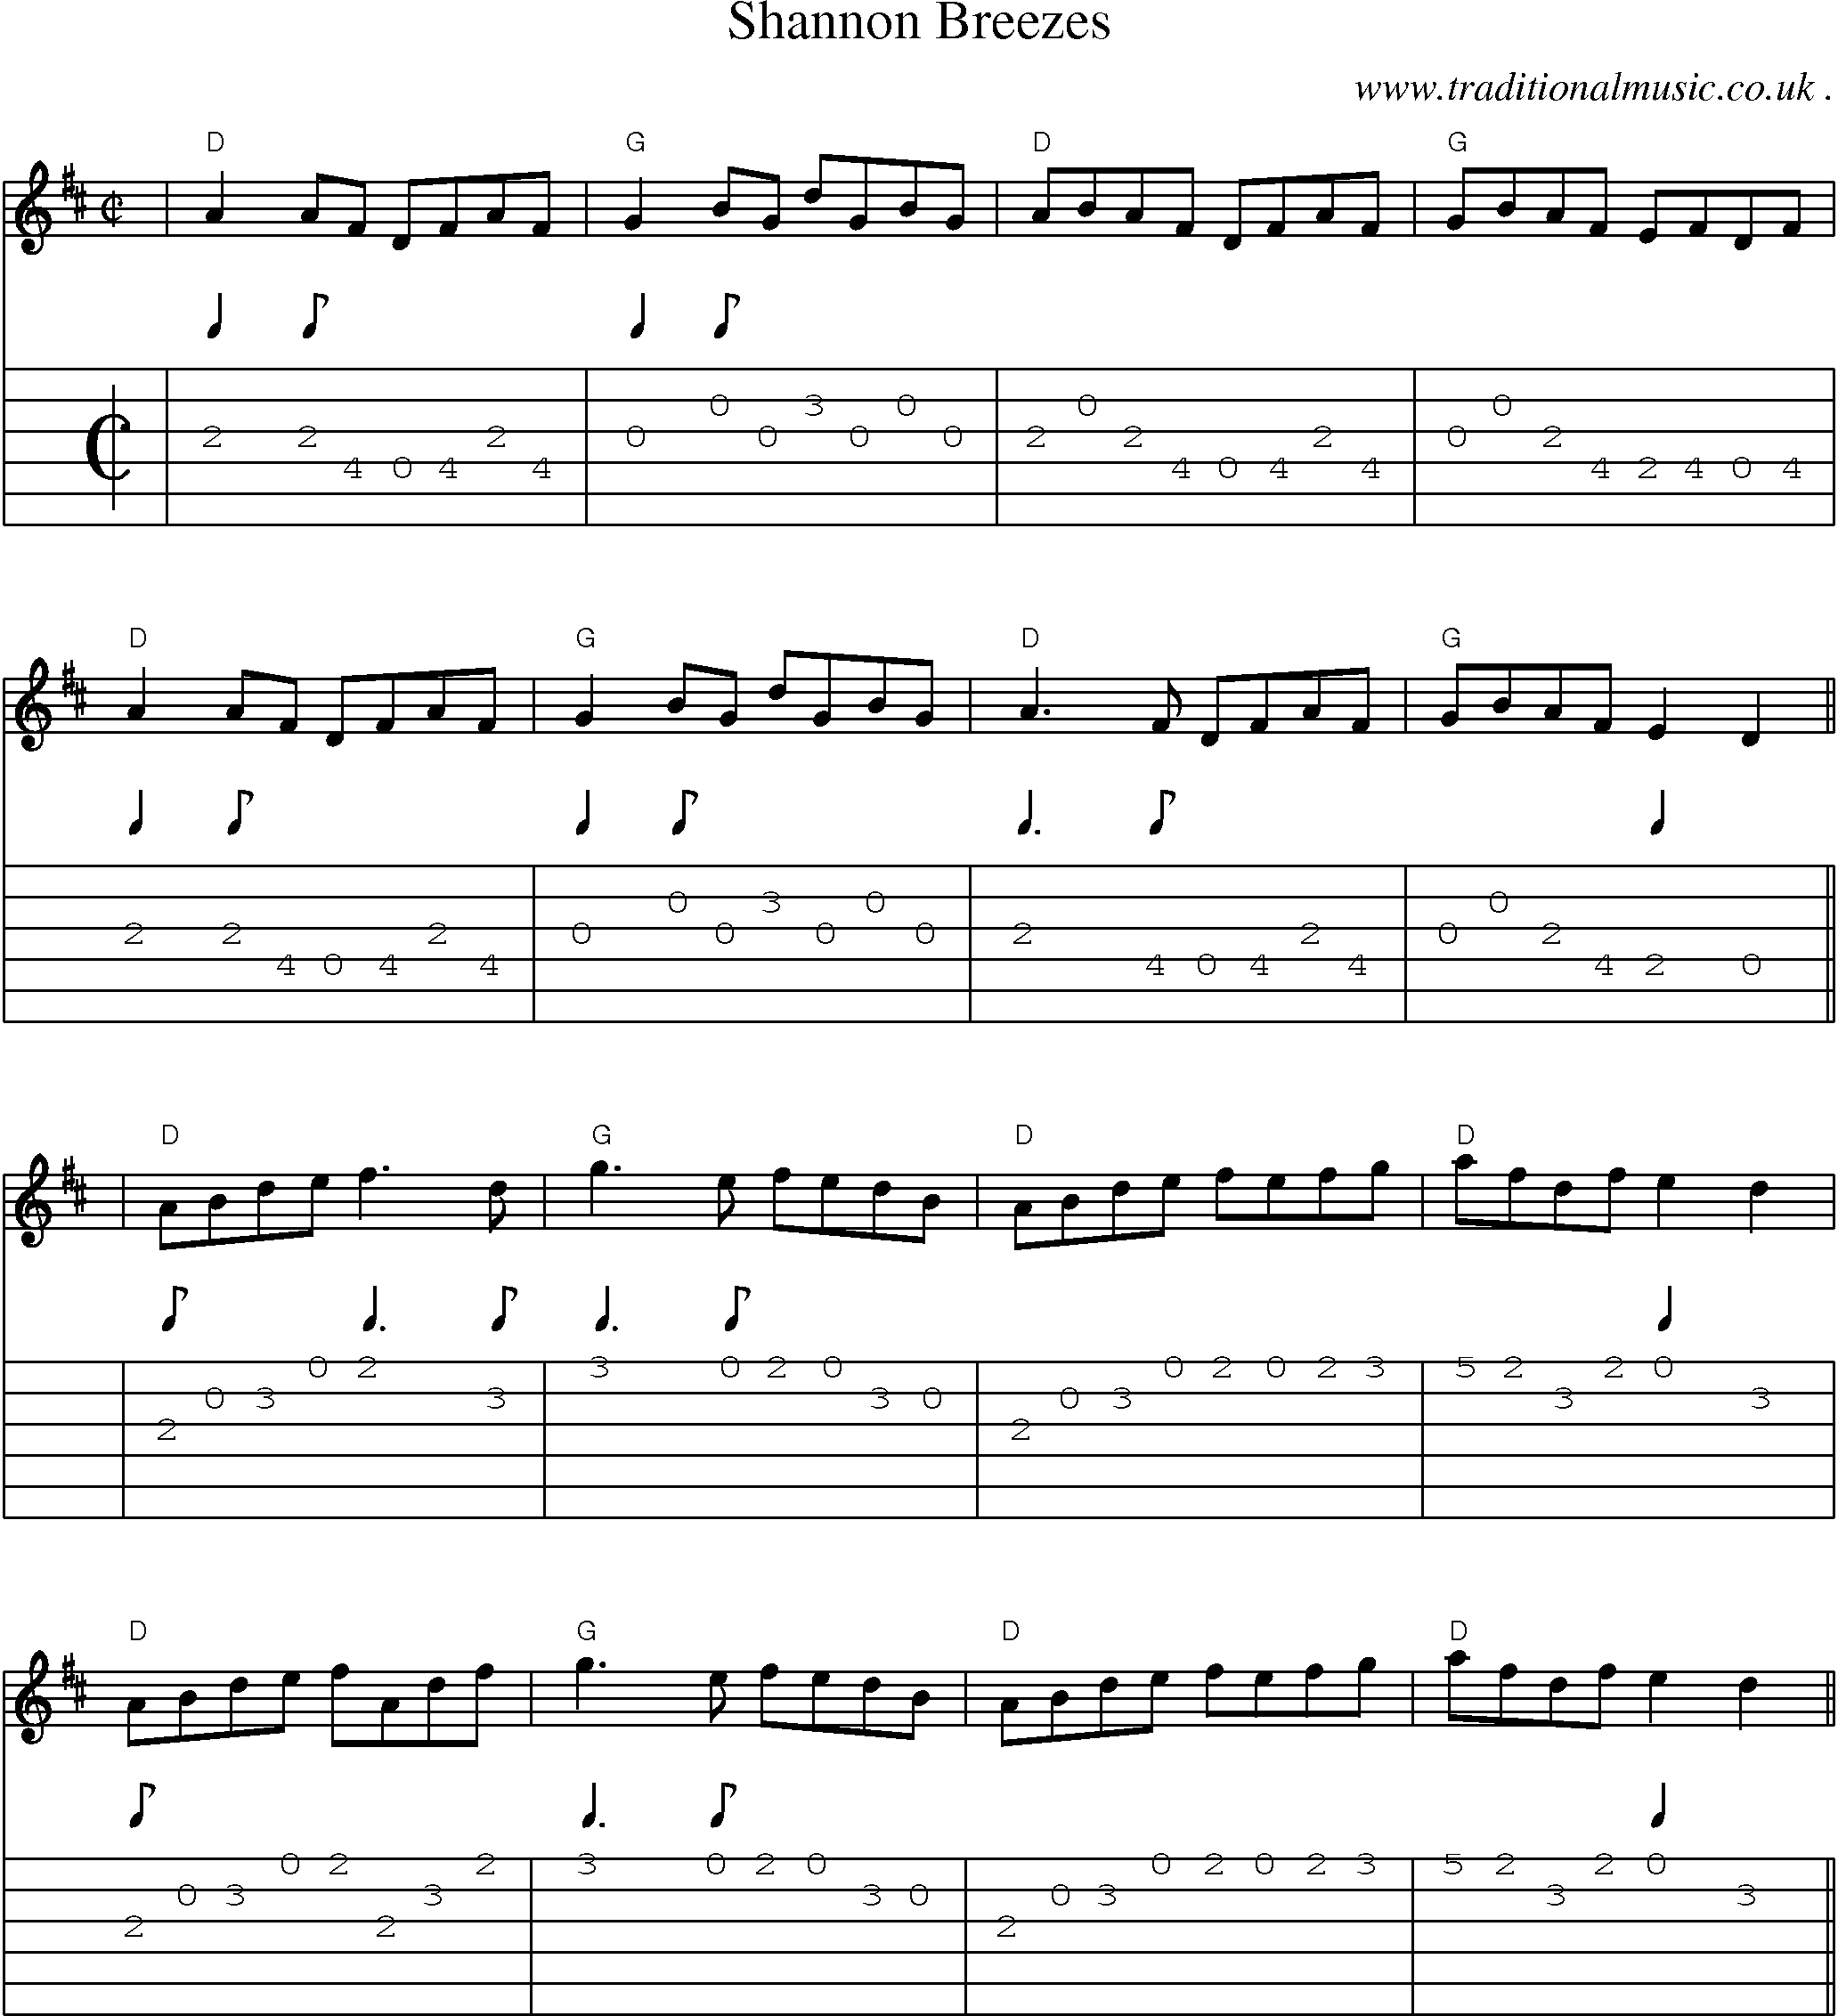 Sheet-Music and Guitar Tabs for Shannon Breezes